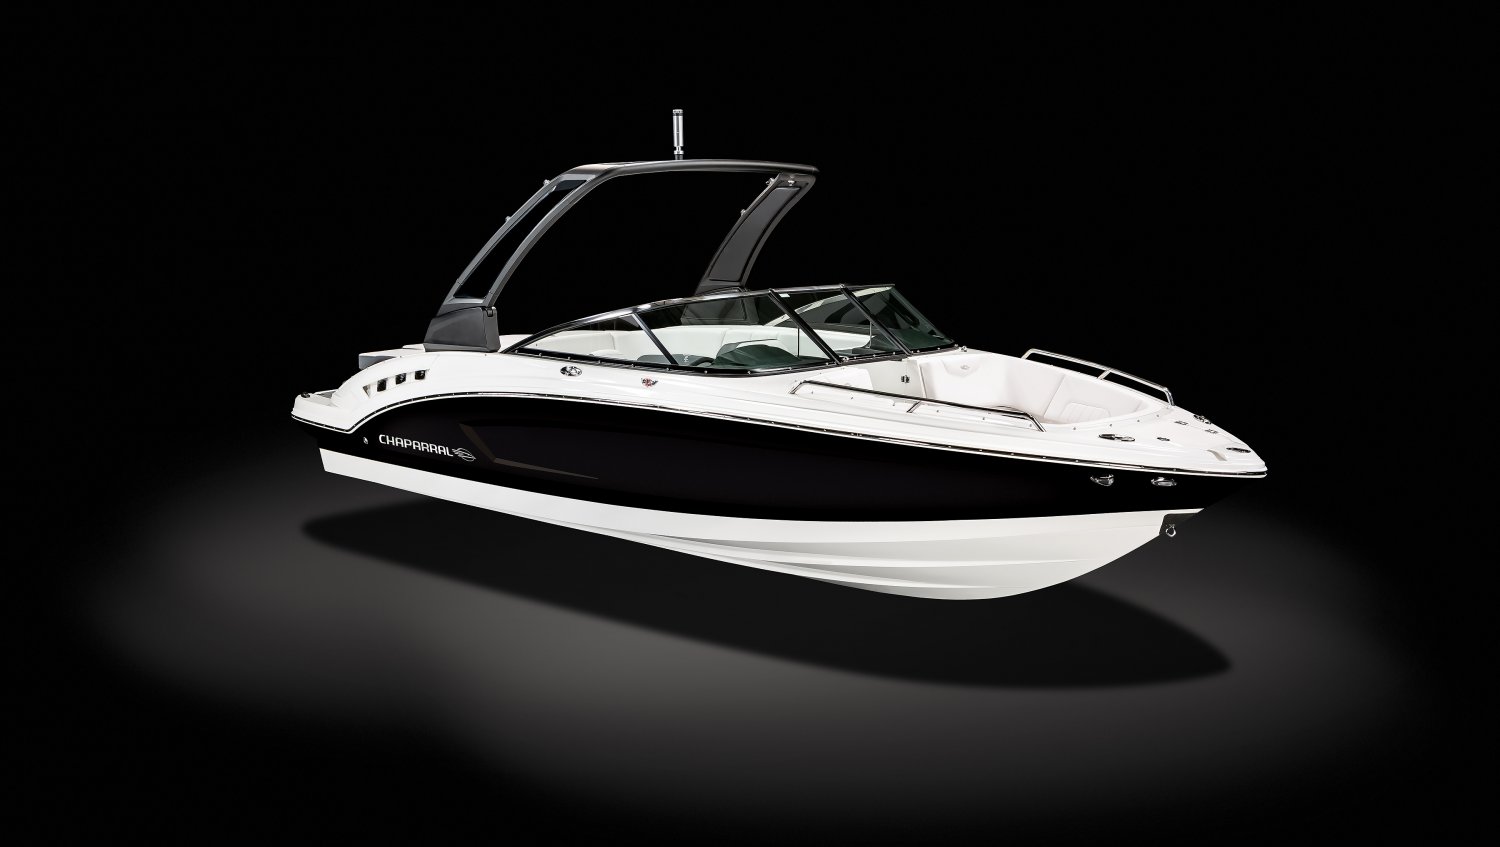 http://www.chaparralboats.com/images/inventoryImages/ssx237_21/1500px/SSX-237-F3Q-SB-19.jpg